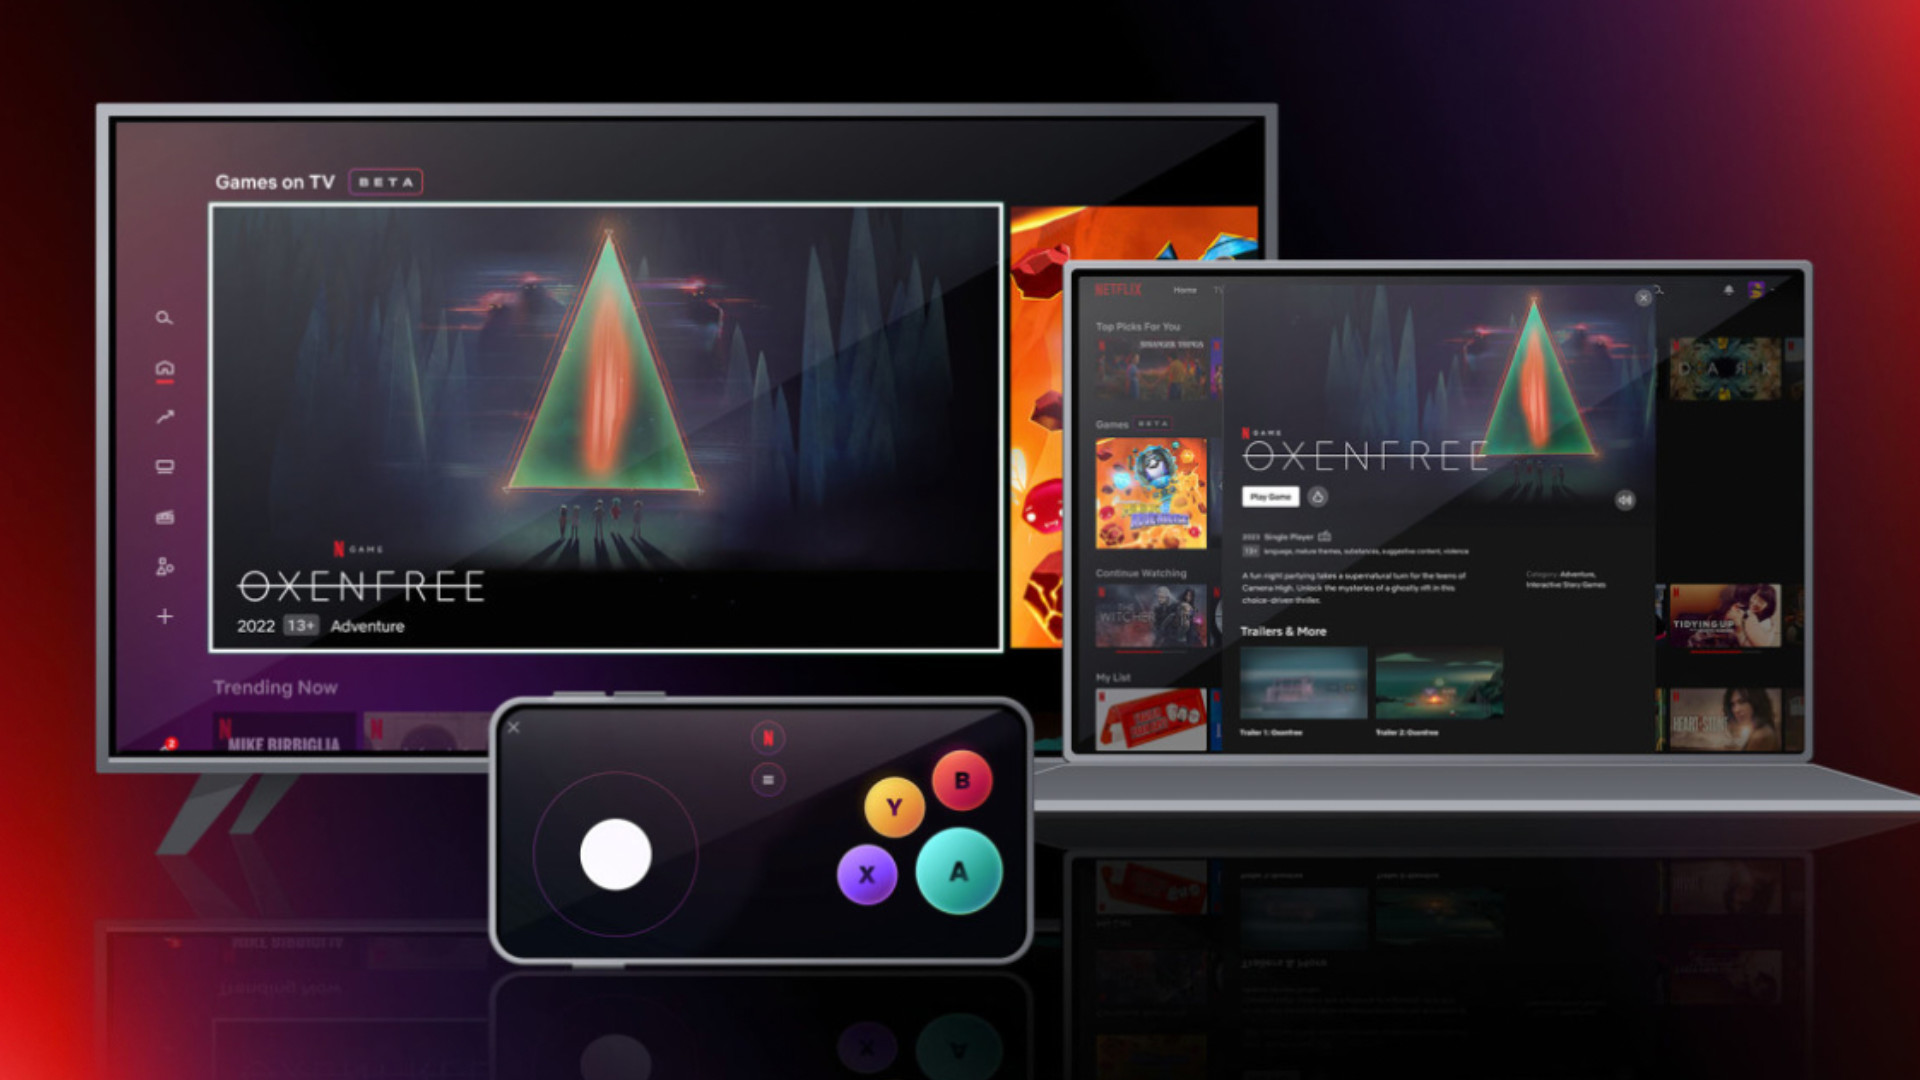 The Netflix gaming interface, including mobile phone controller.